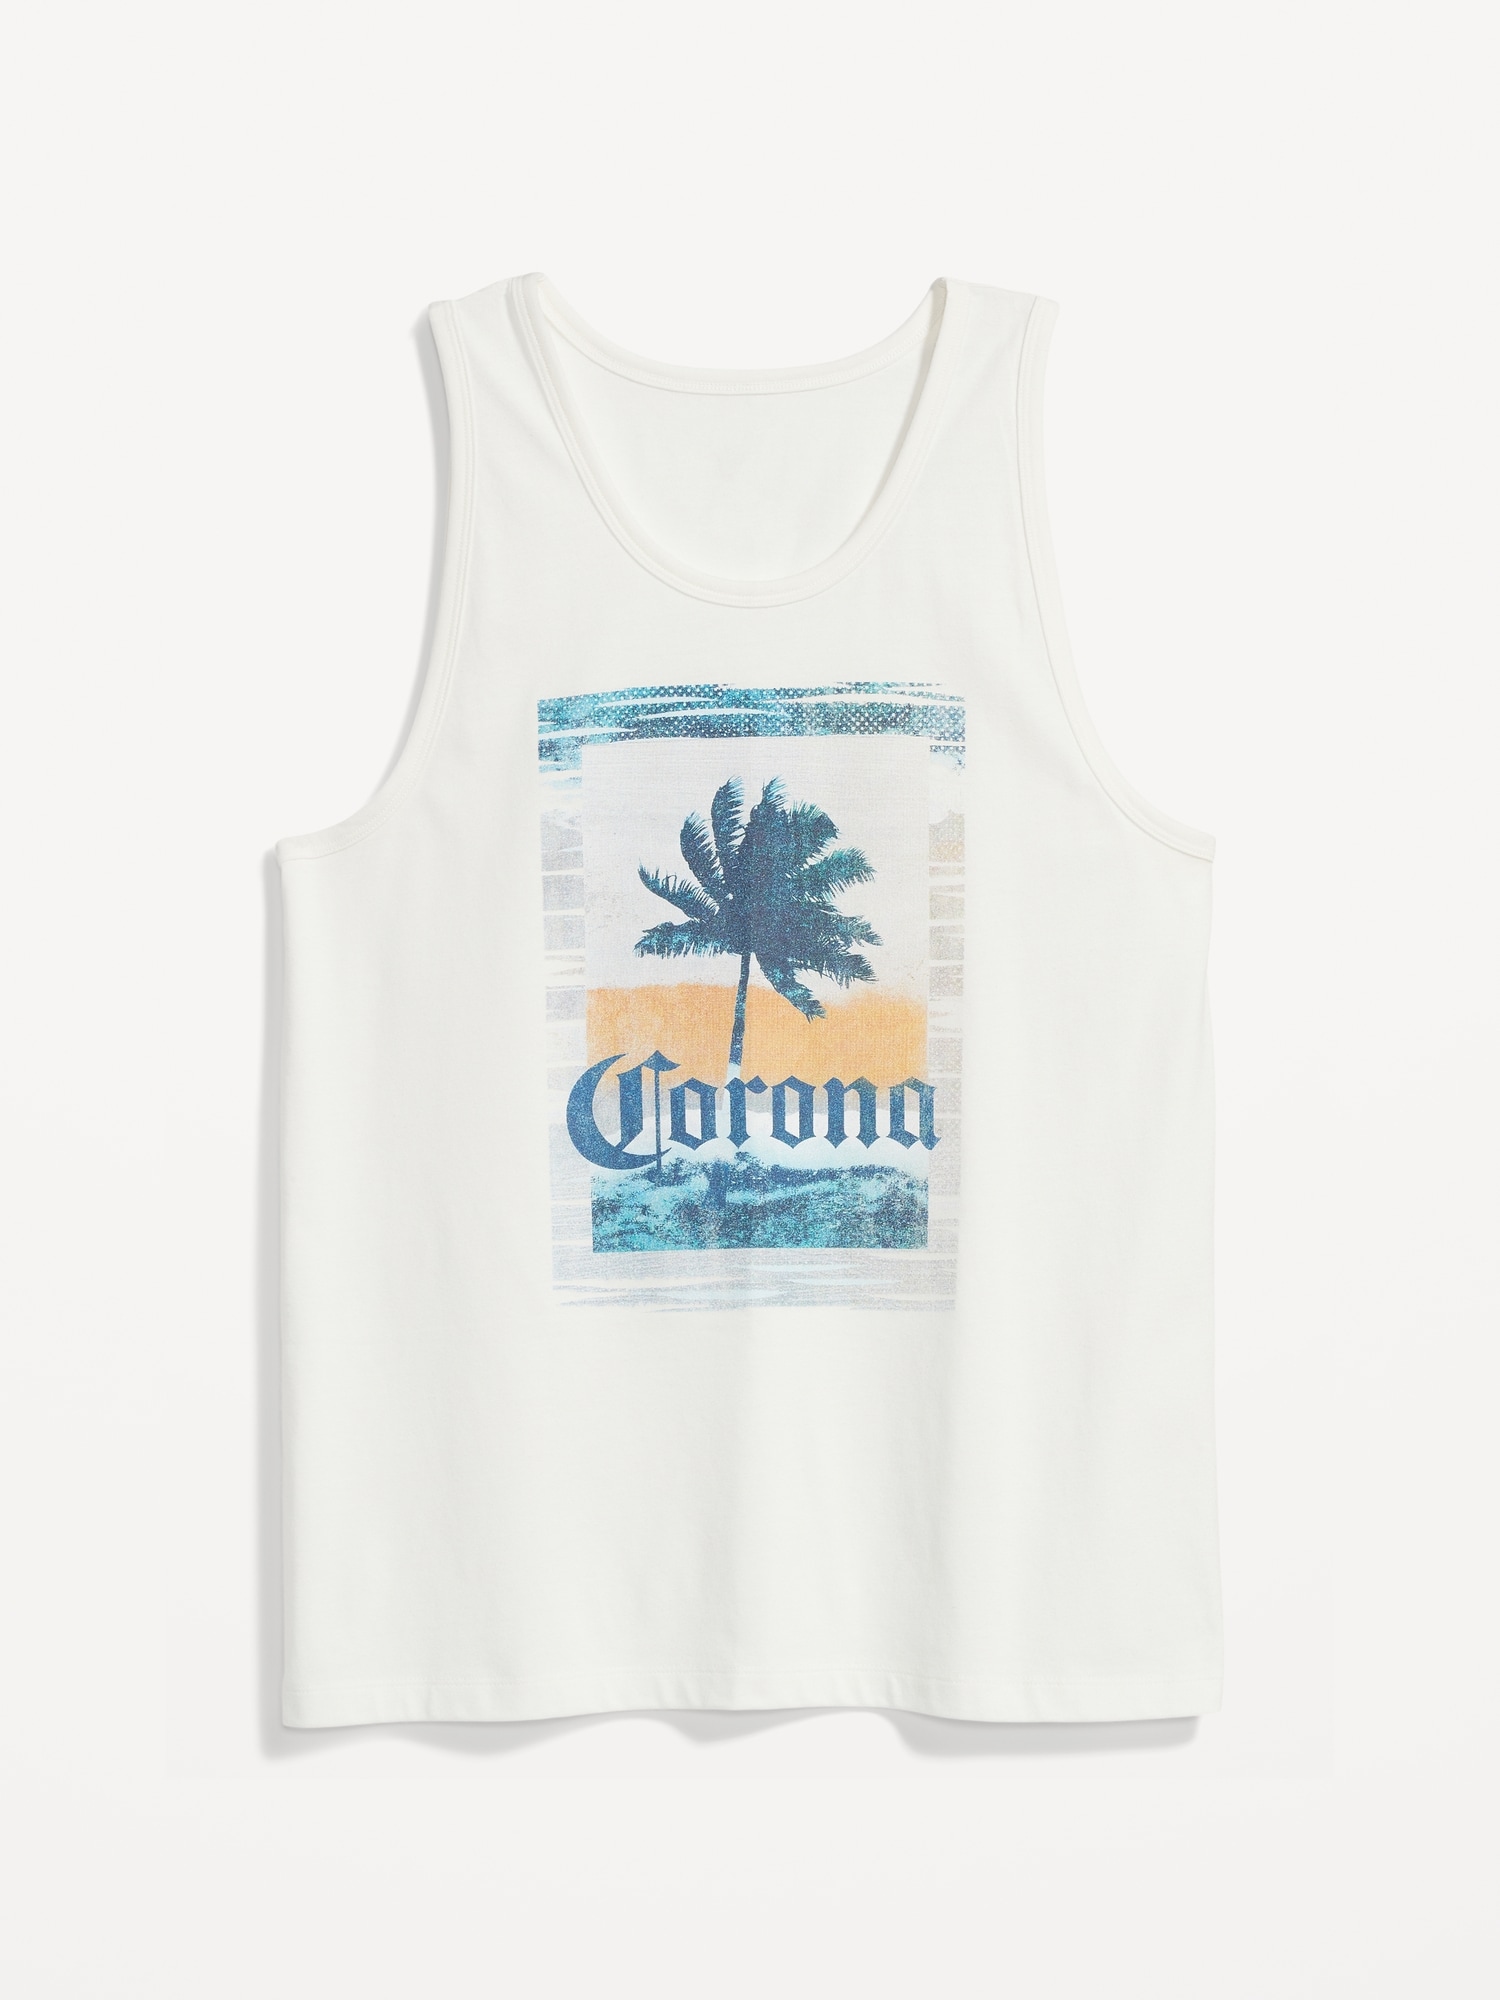 Old Navy Corona© Gender-Neutral Tank Top for Adults white. 1